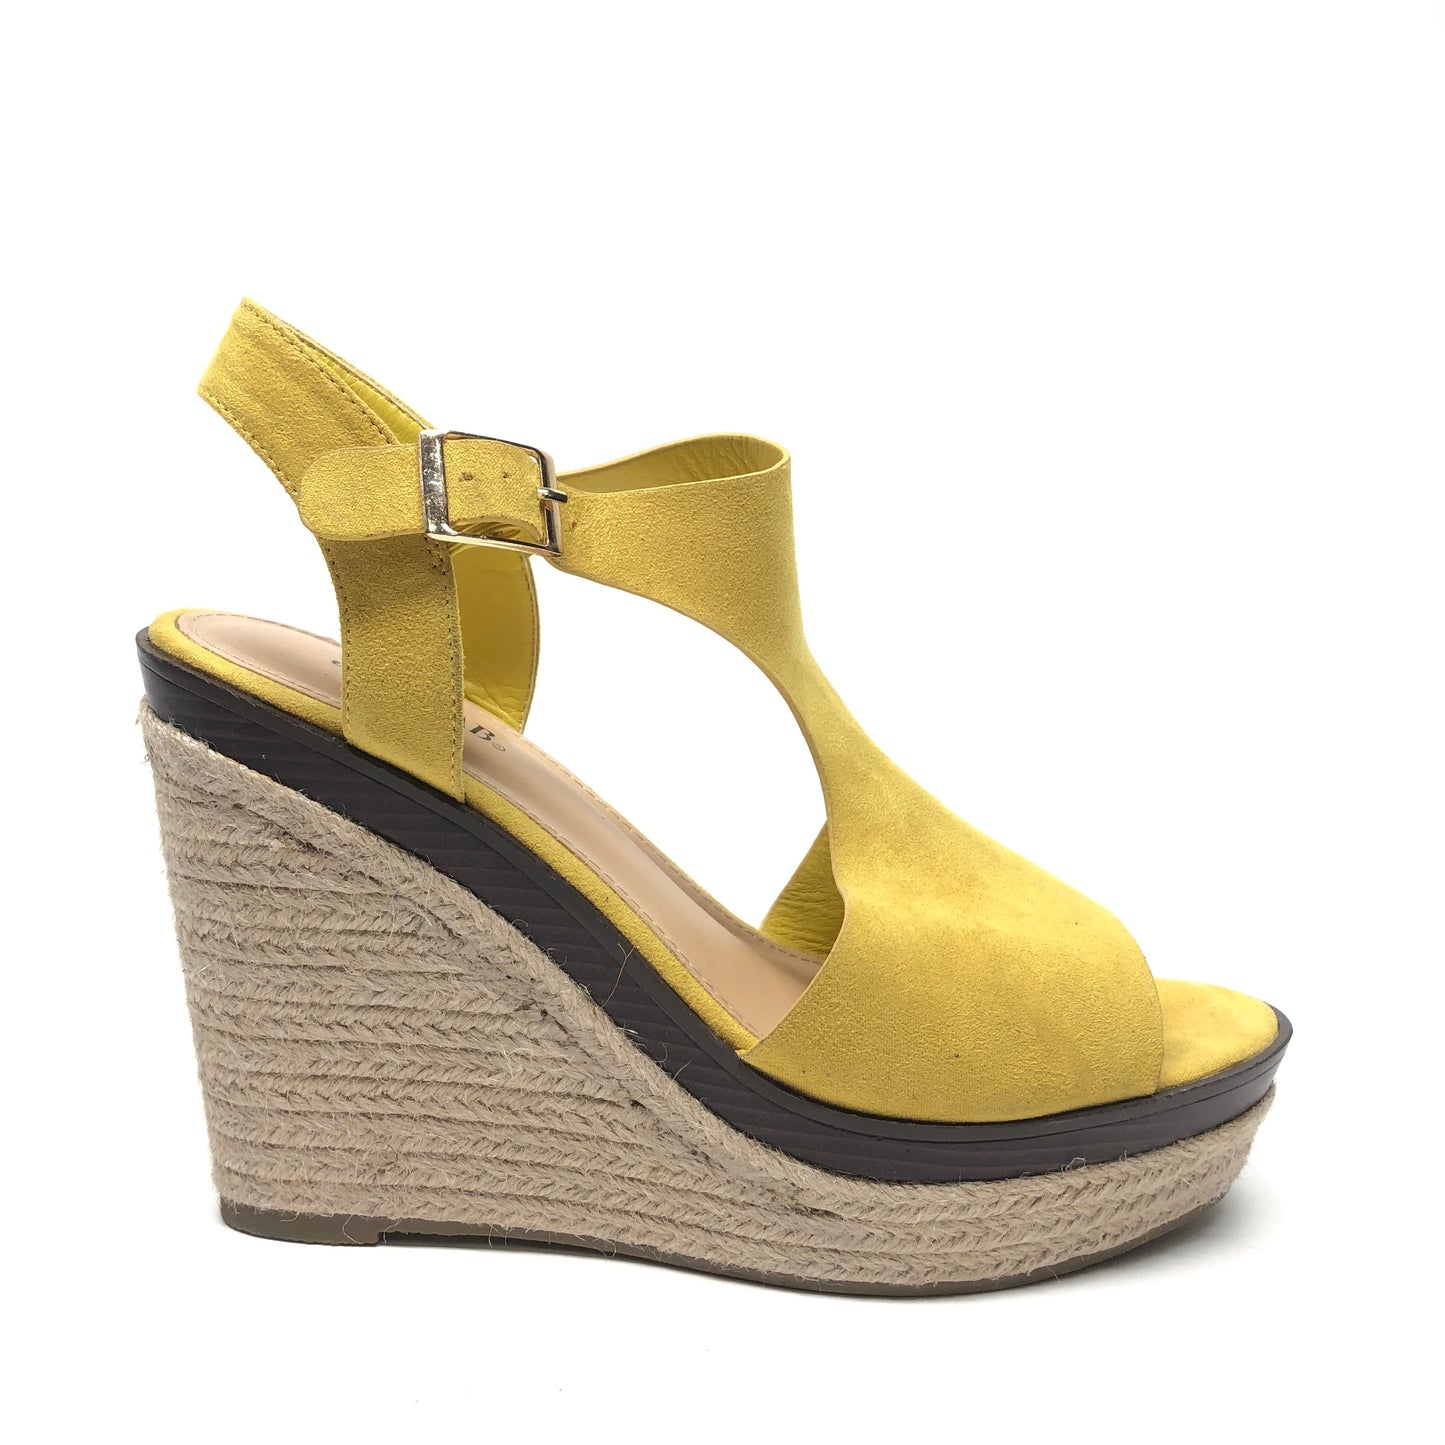 Yellow Sandals Heels Wedge Just Fab, Size 11